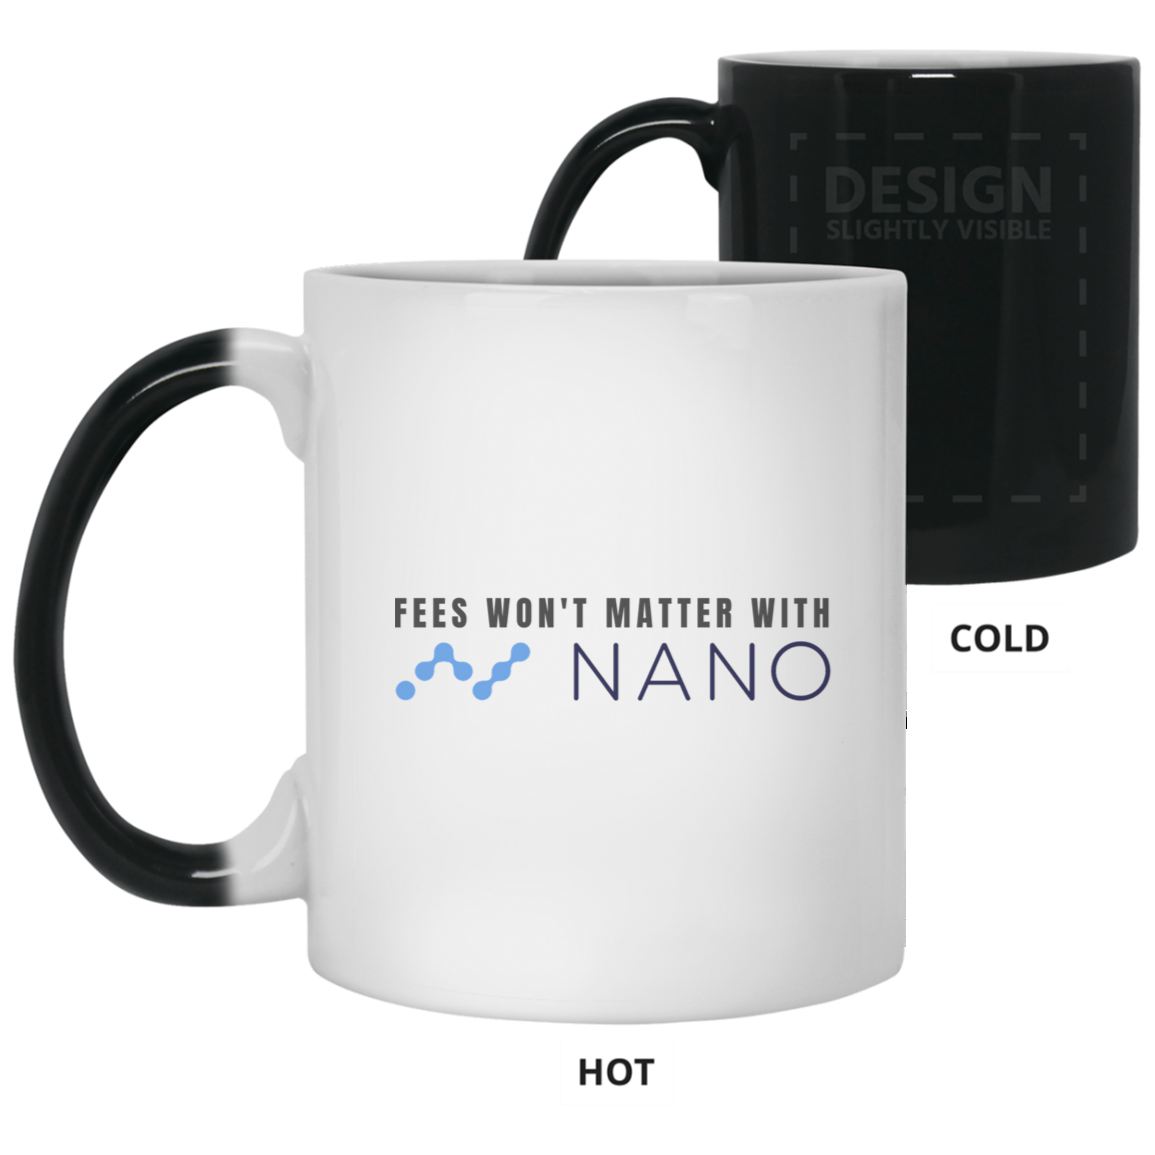 Fees won't matter with nano - 11oz. Color Changing Mug TCP1607 White / One Size Official Crypto  Merch